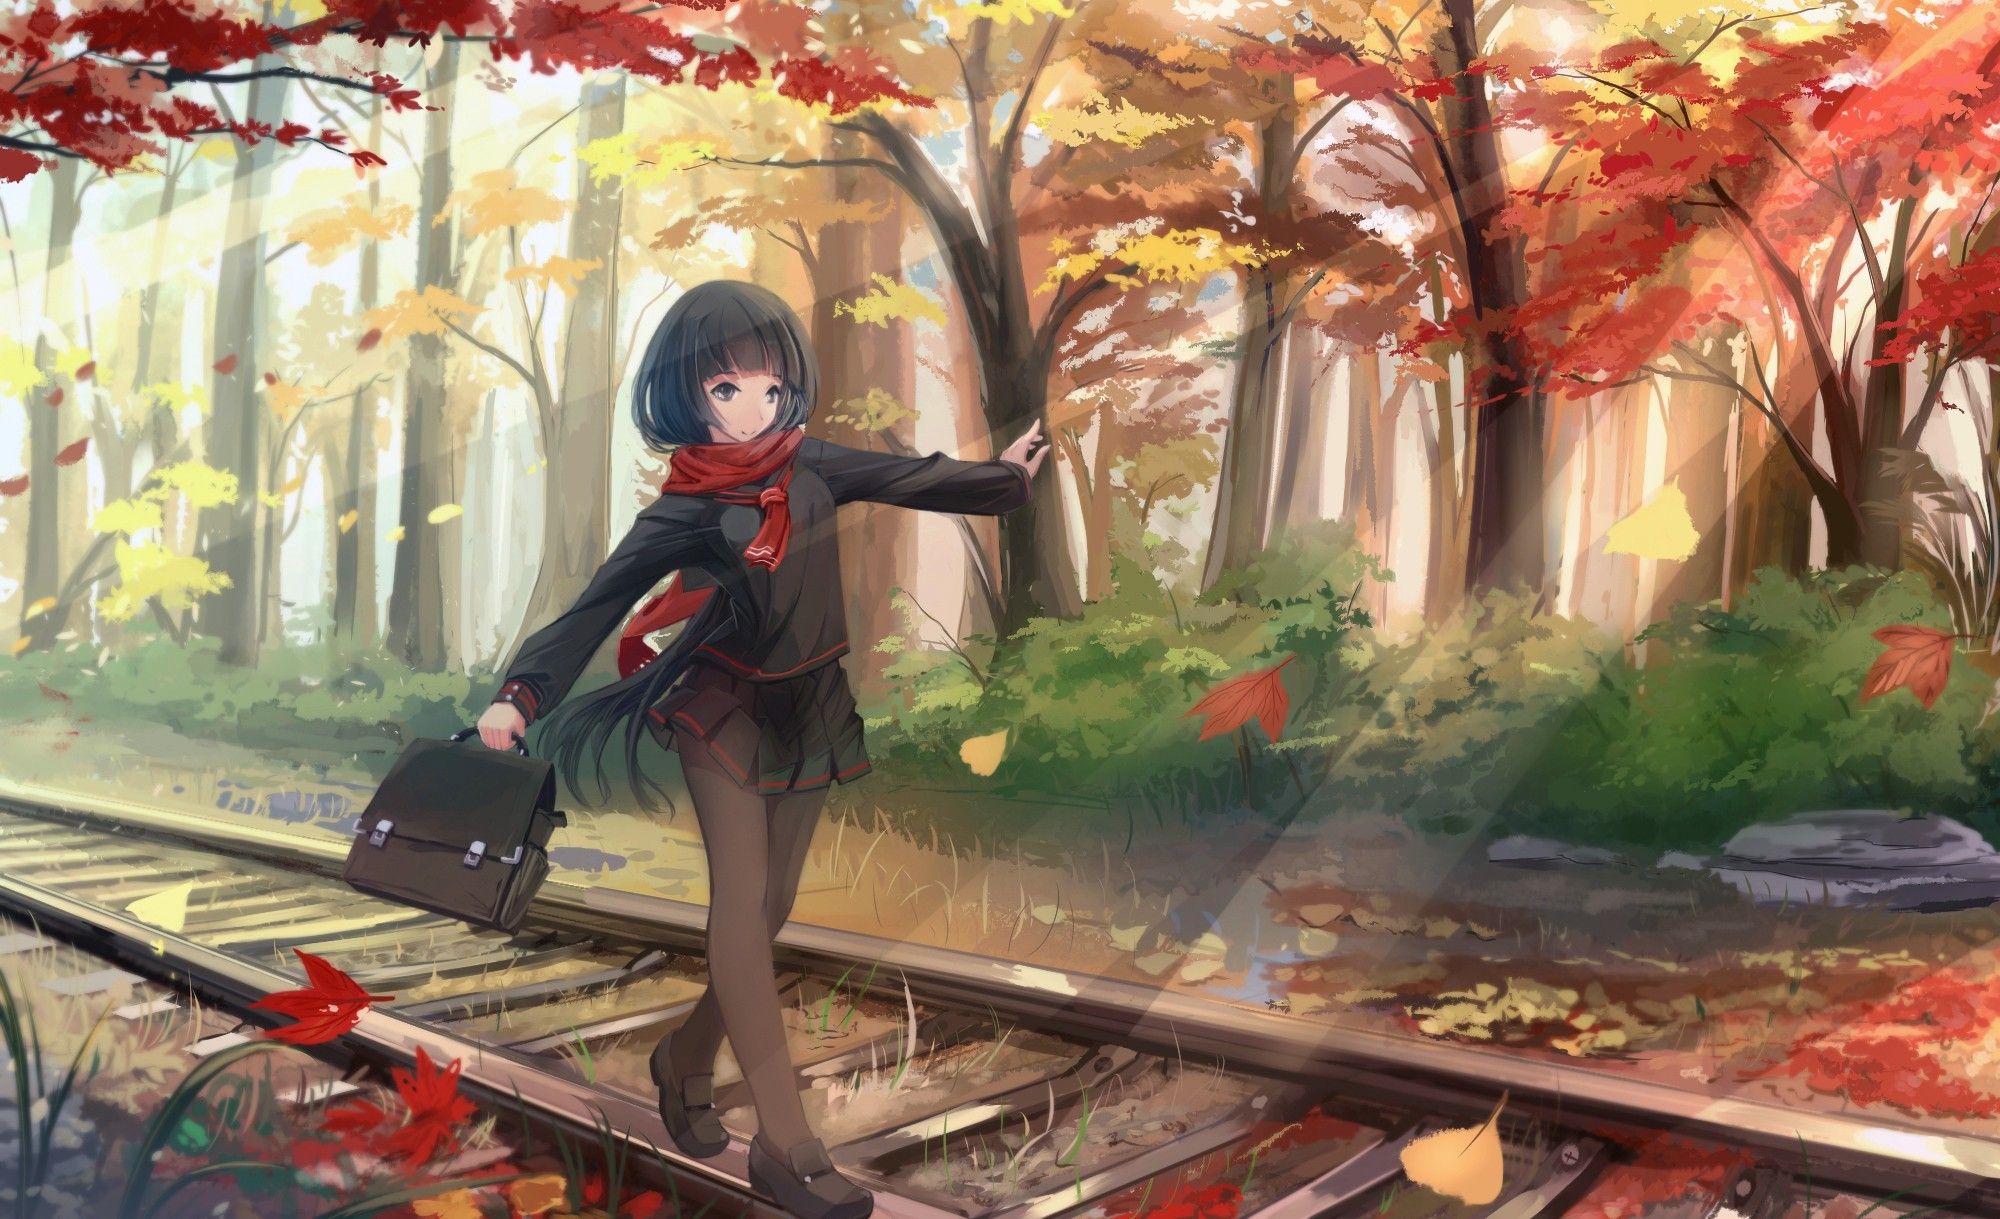 1,948 Fall Anime Images, Stock Photos & Vectors | Shutterstock